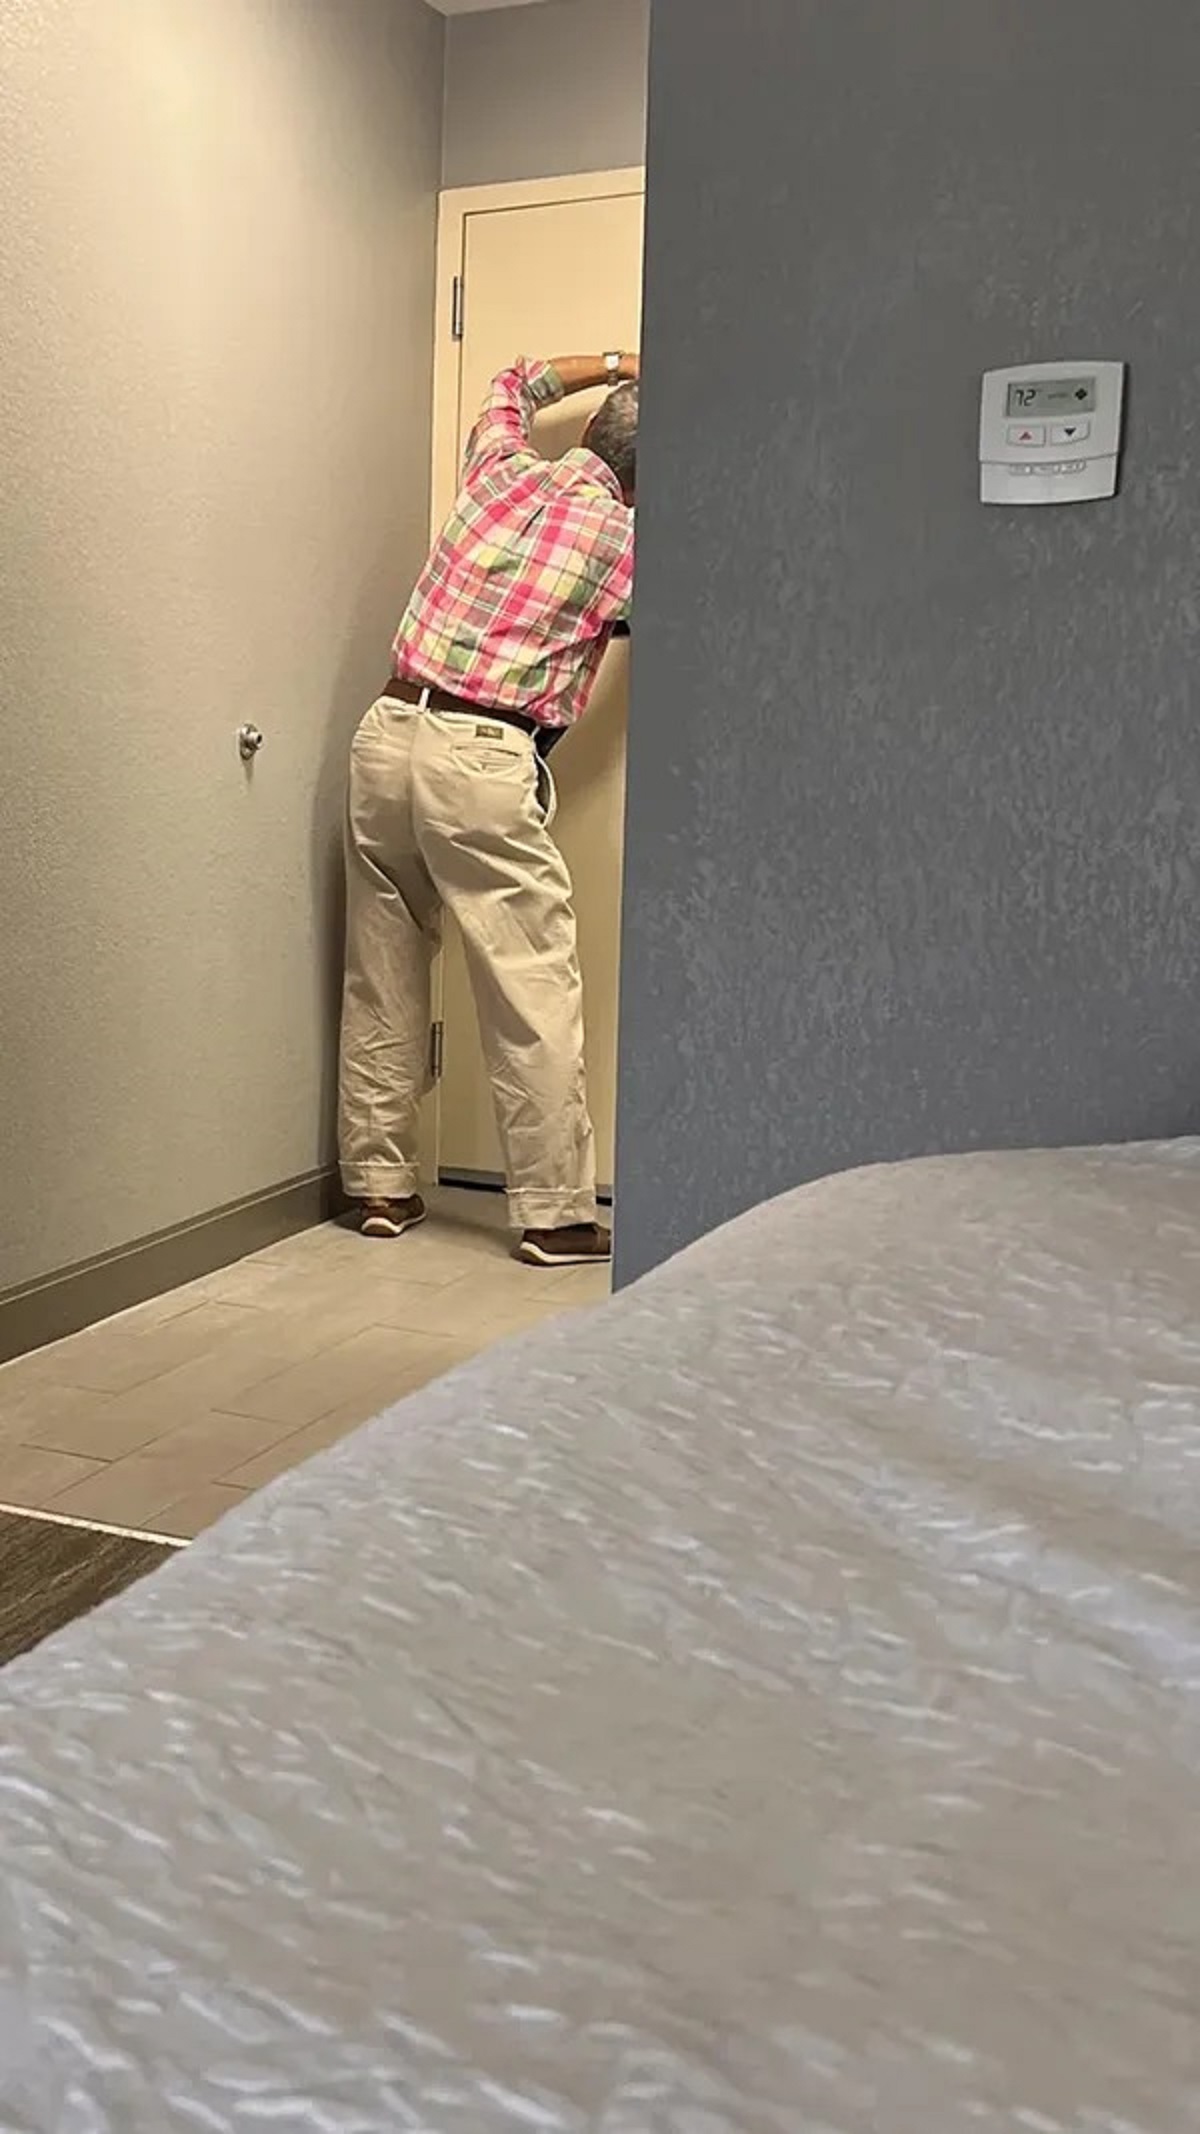 Hotel Manager decided to come into my room while I was still in there to paint the door (that didn’t even need painting in my opinion).